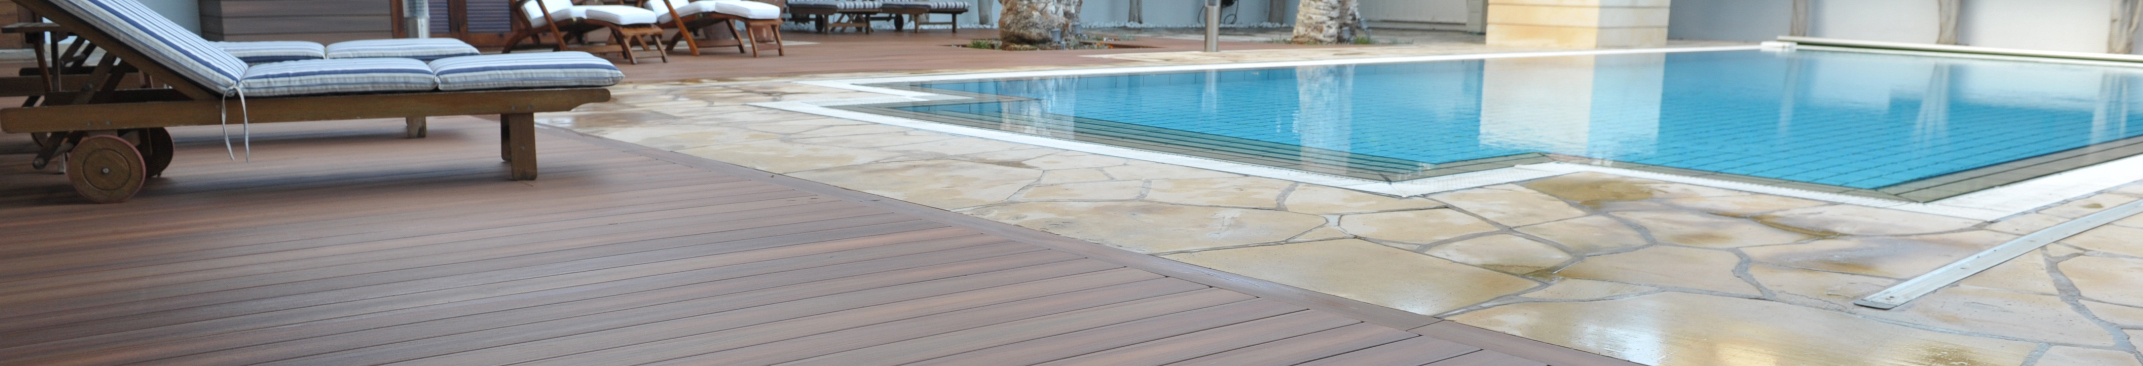 5 Reasons Why Quality Composite Decking Is a Worthy Investment